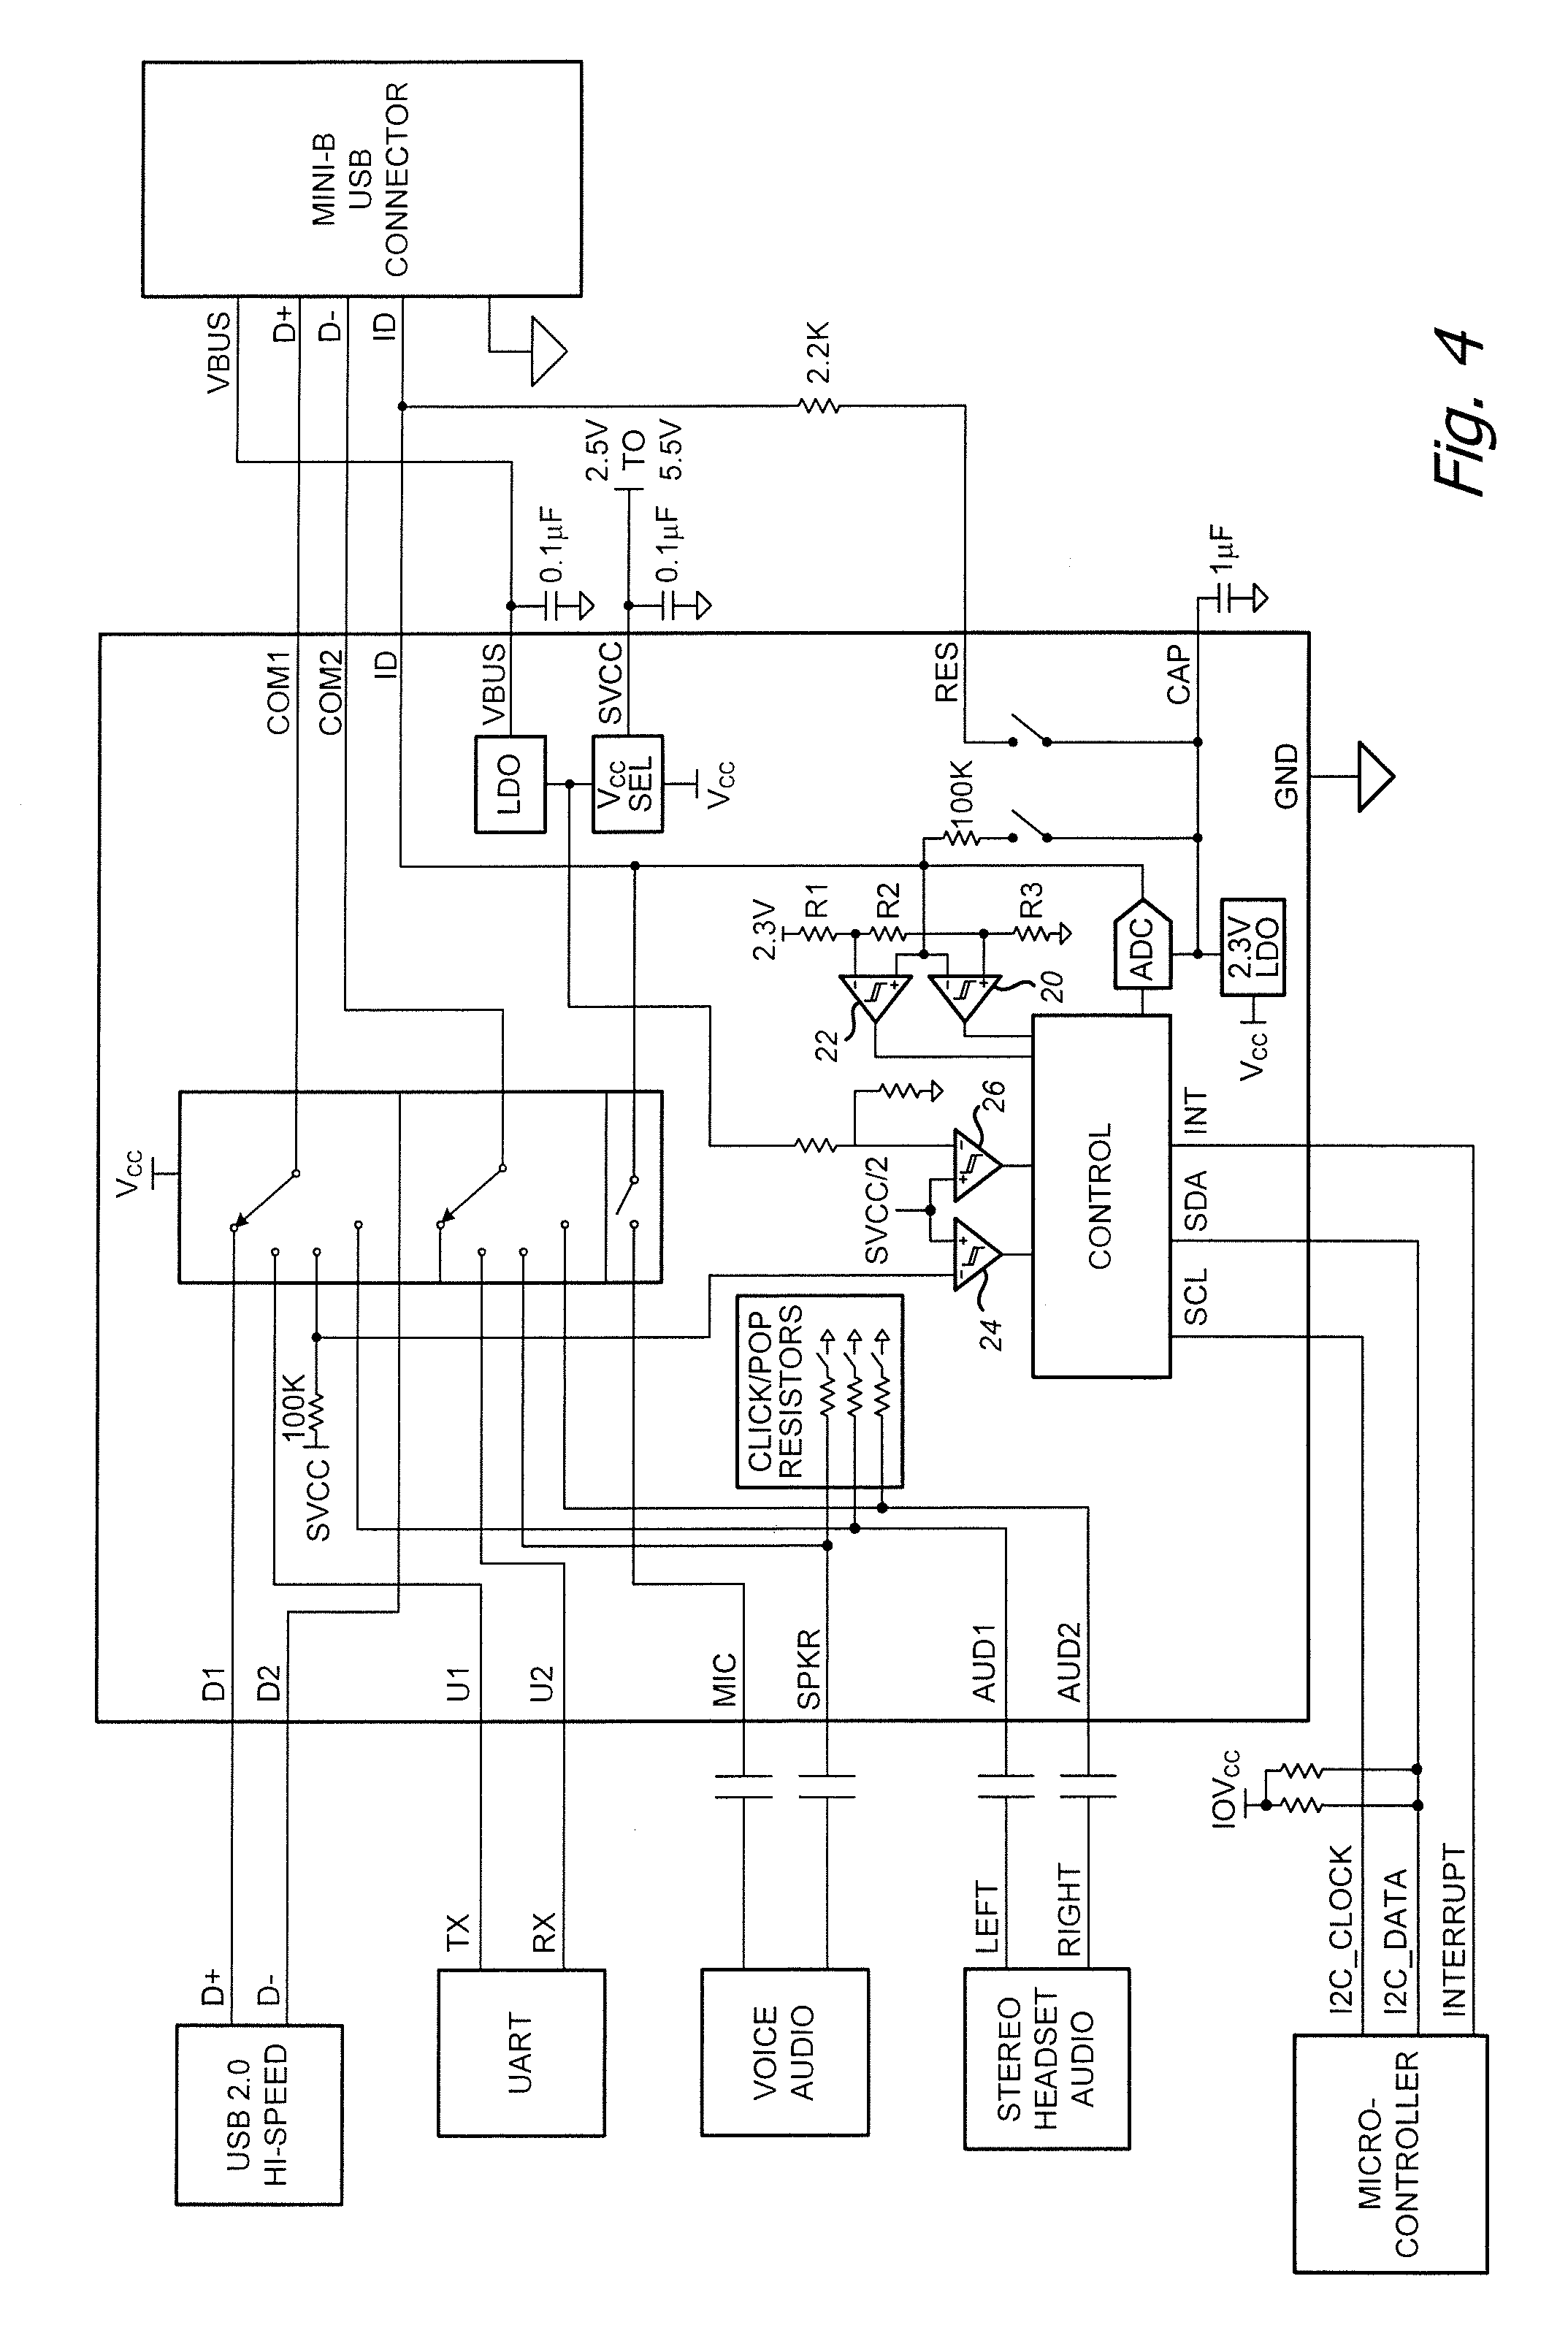 Electret microphone detection using a current source